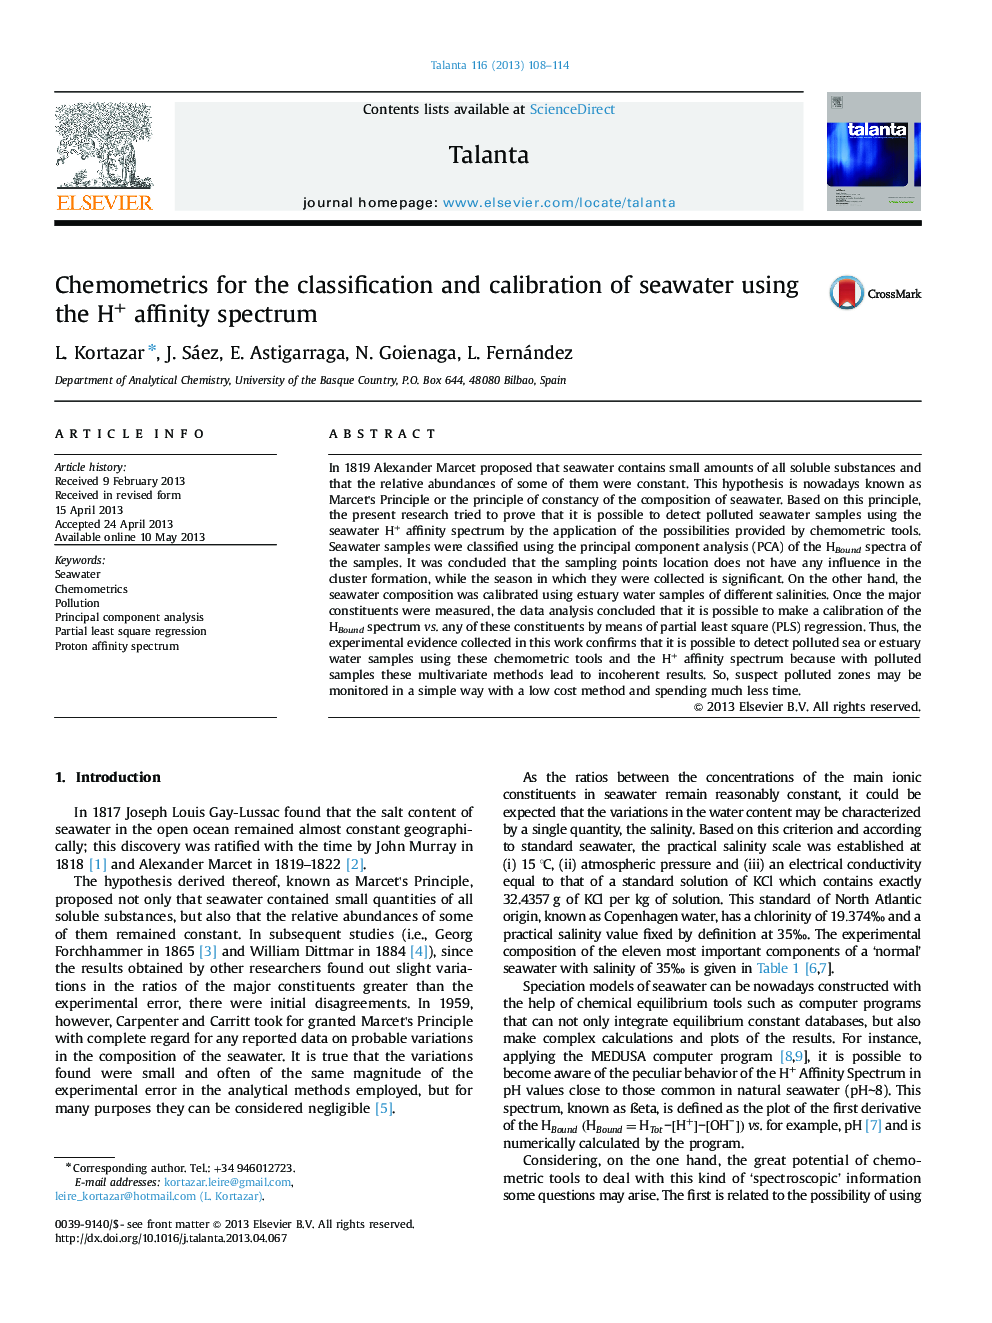 Chemometrics for the classification and calibration of seawater using the H+ affinity spectrum